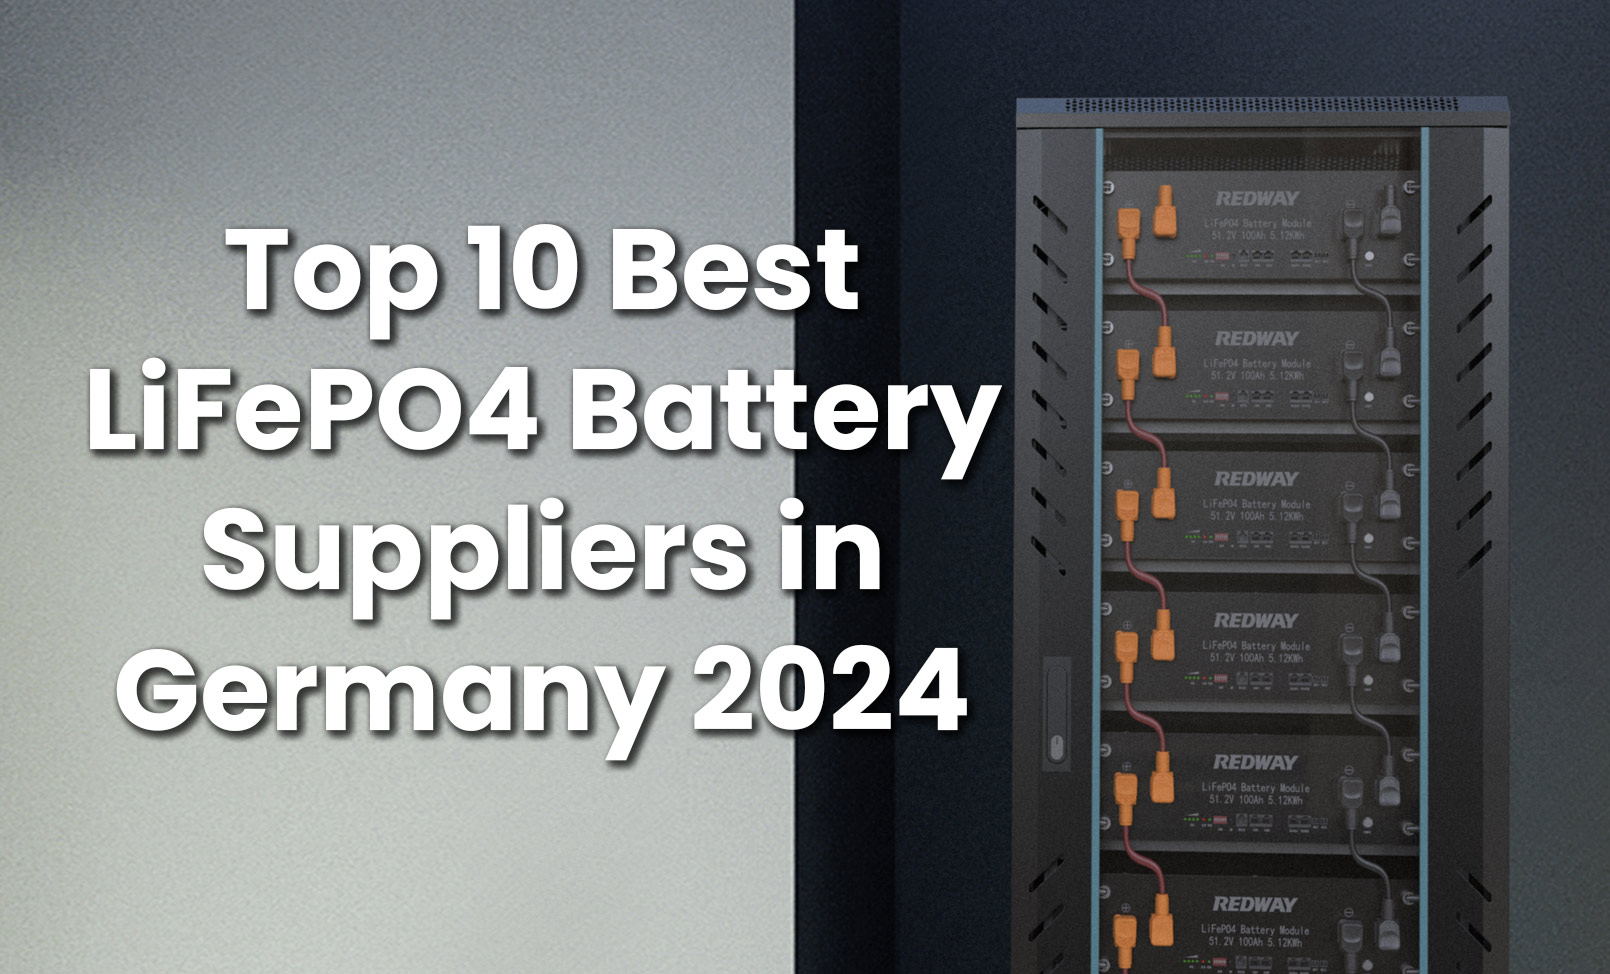 Top 10 Best LiFePO4 Battery Suppliers in Germany 2024